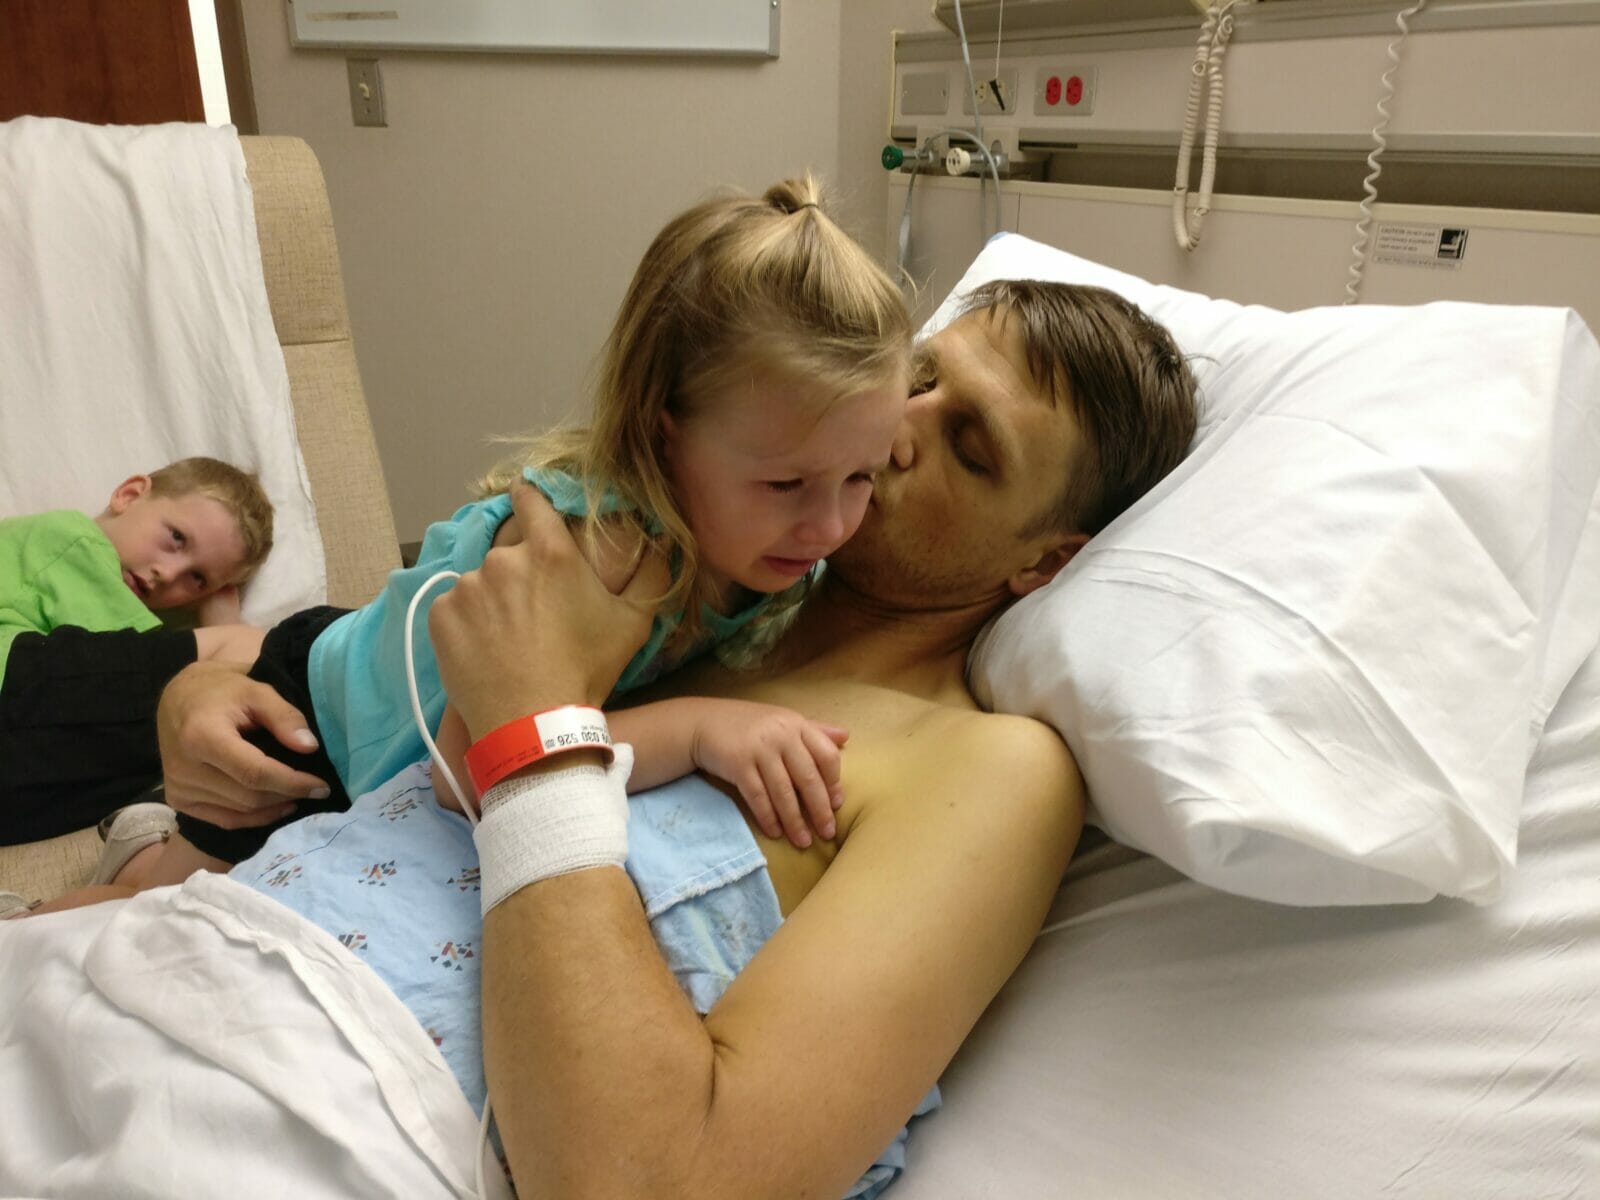 Father in hospital bed comforts crying and worried children.